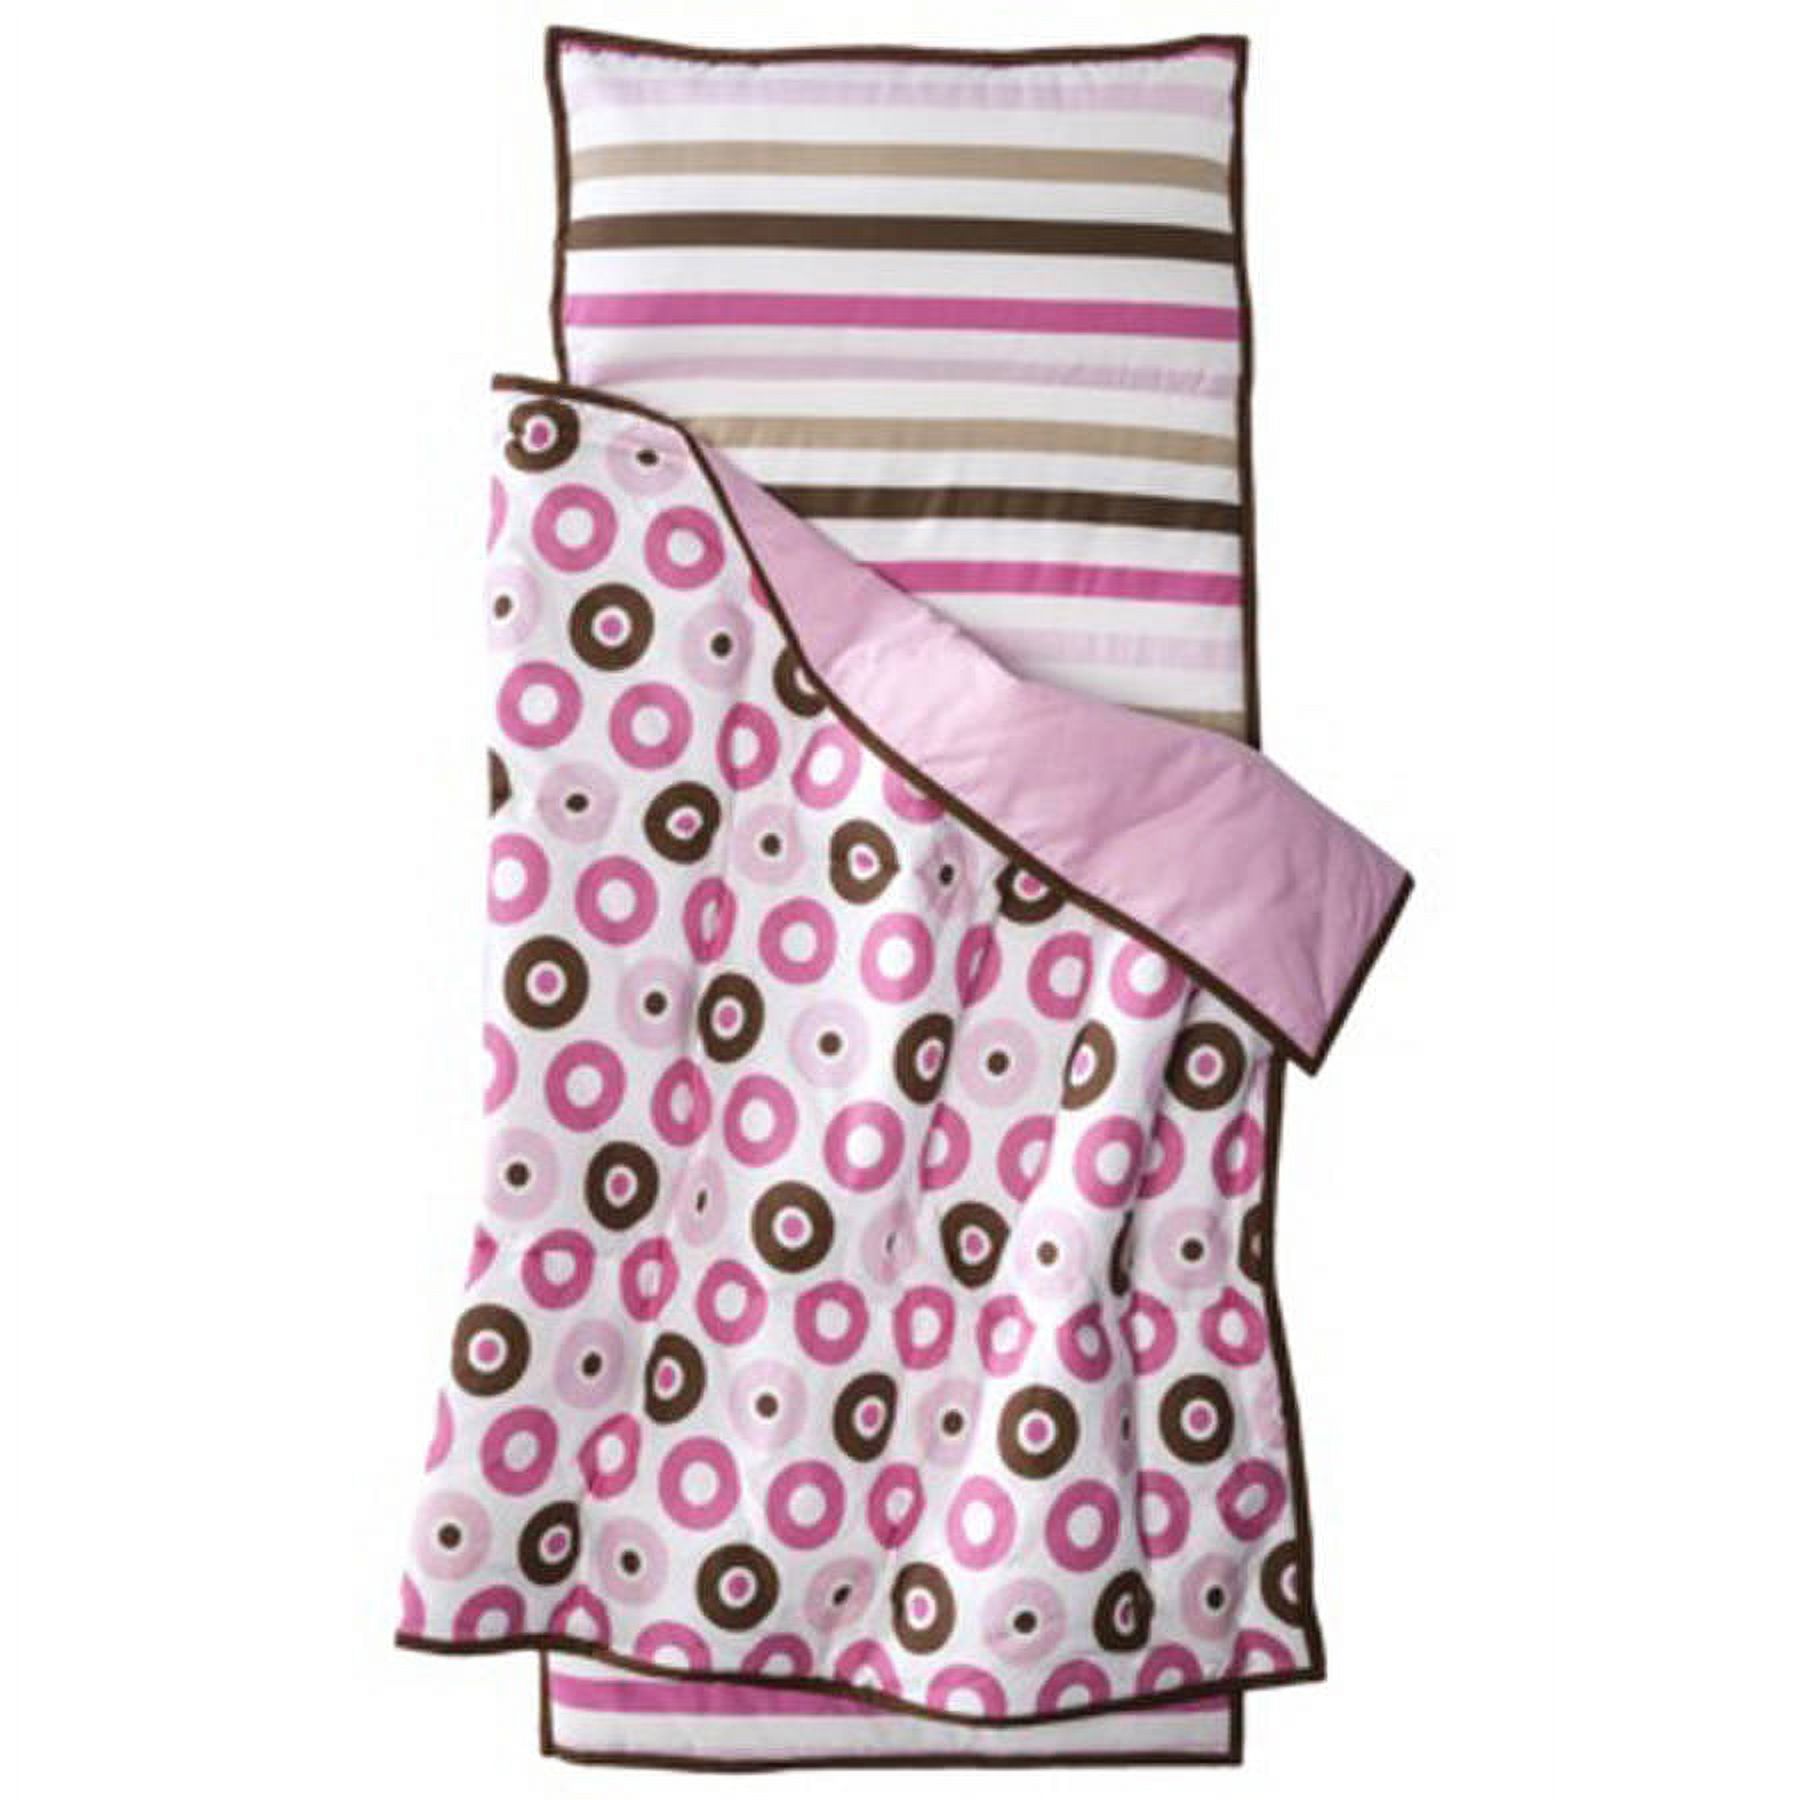 Bacati - Mod Dots/StripesToddler Nap Mat in Pink, 100% Cotton Percale with attached pillow, size 20 x 50 inches - image 3 of 5